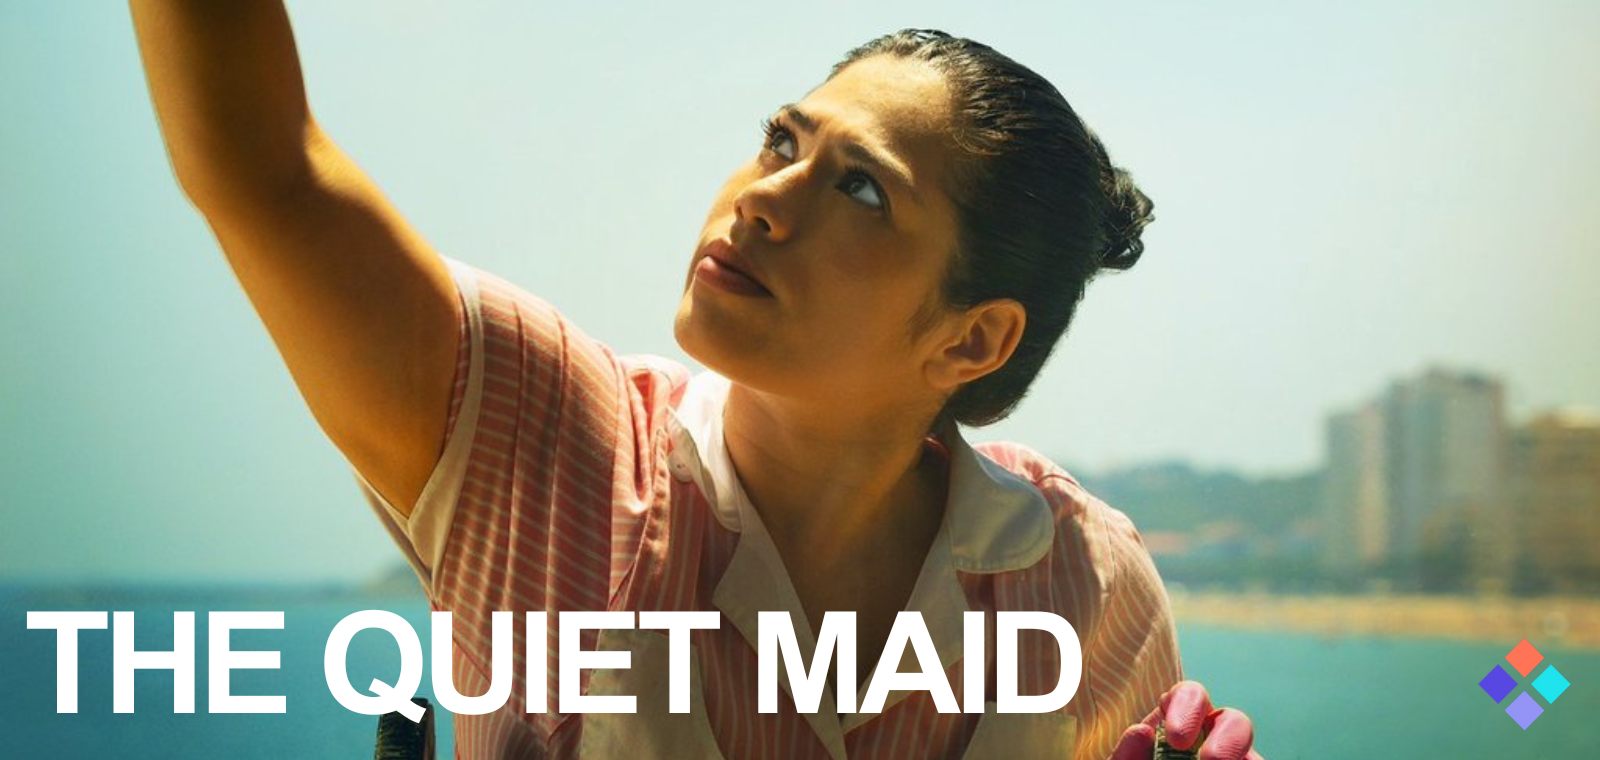 NFT-Funded ‘The Quiet Maid’ Movie Secures Global Sales Deal